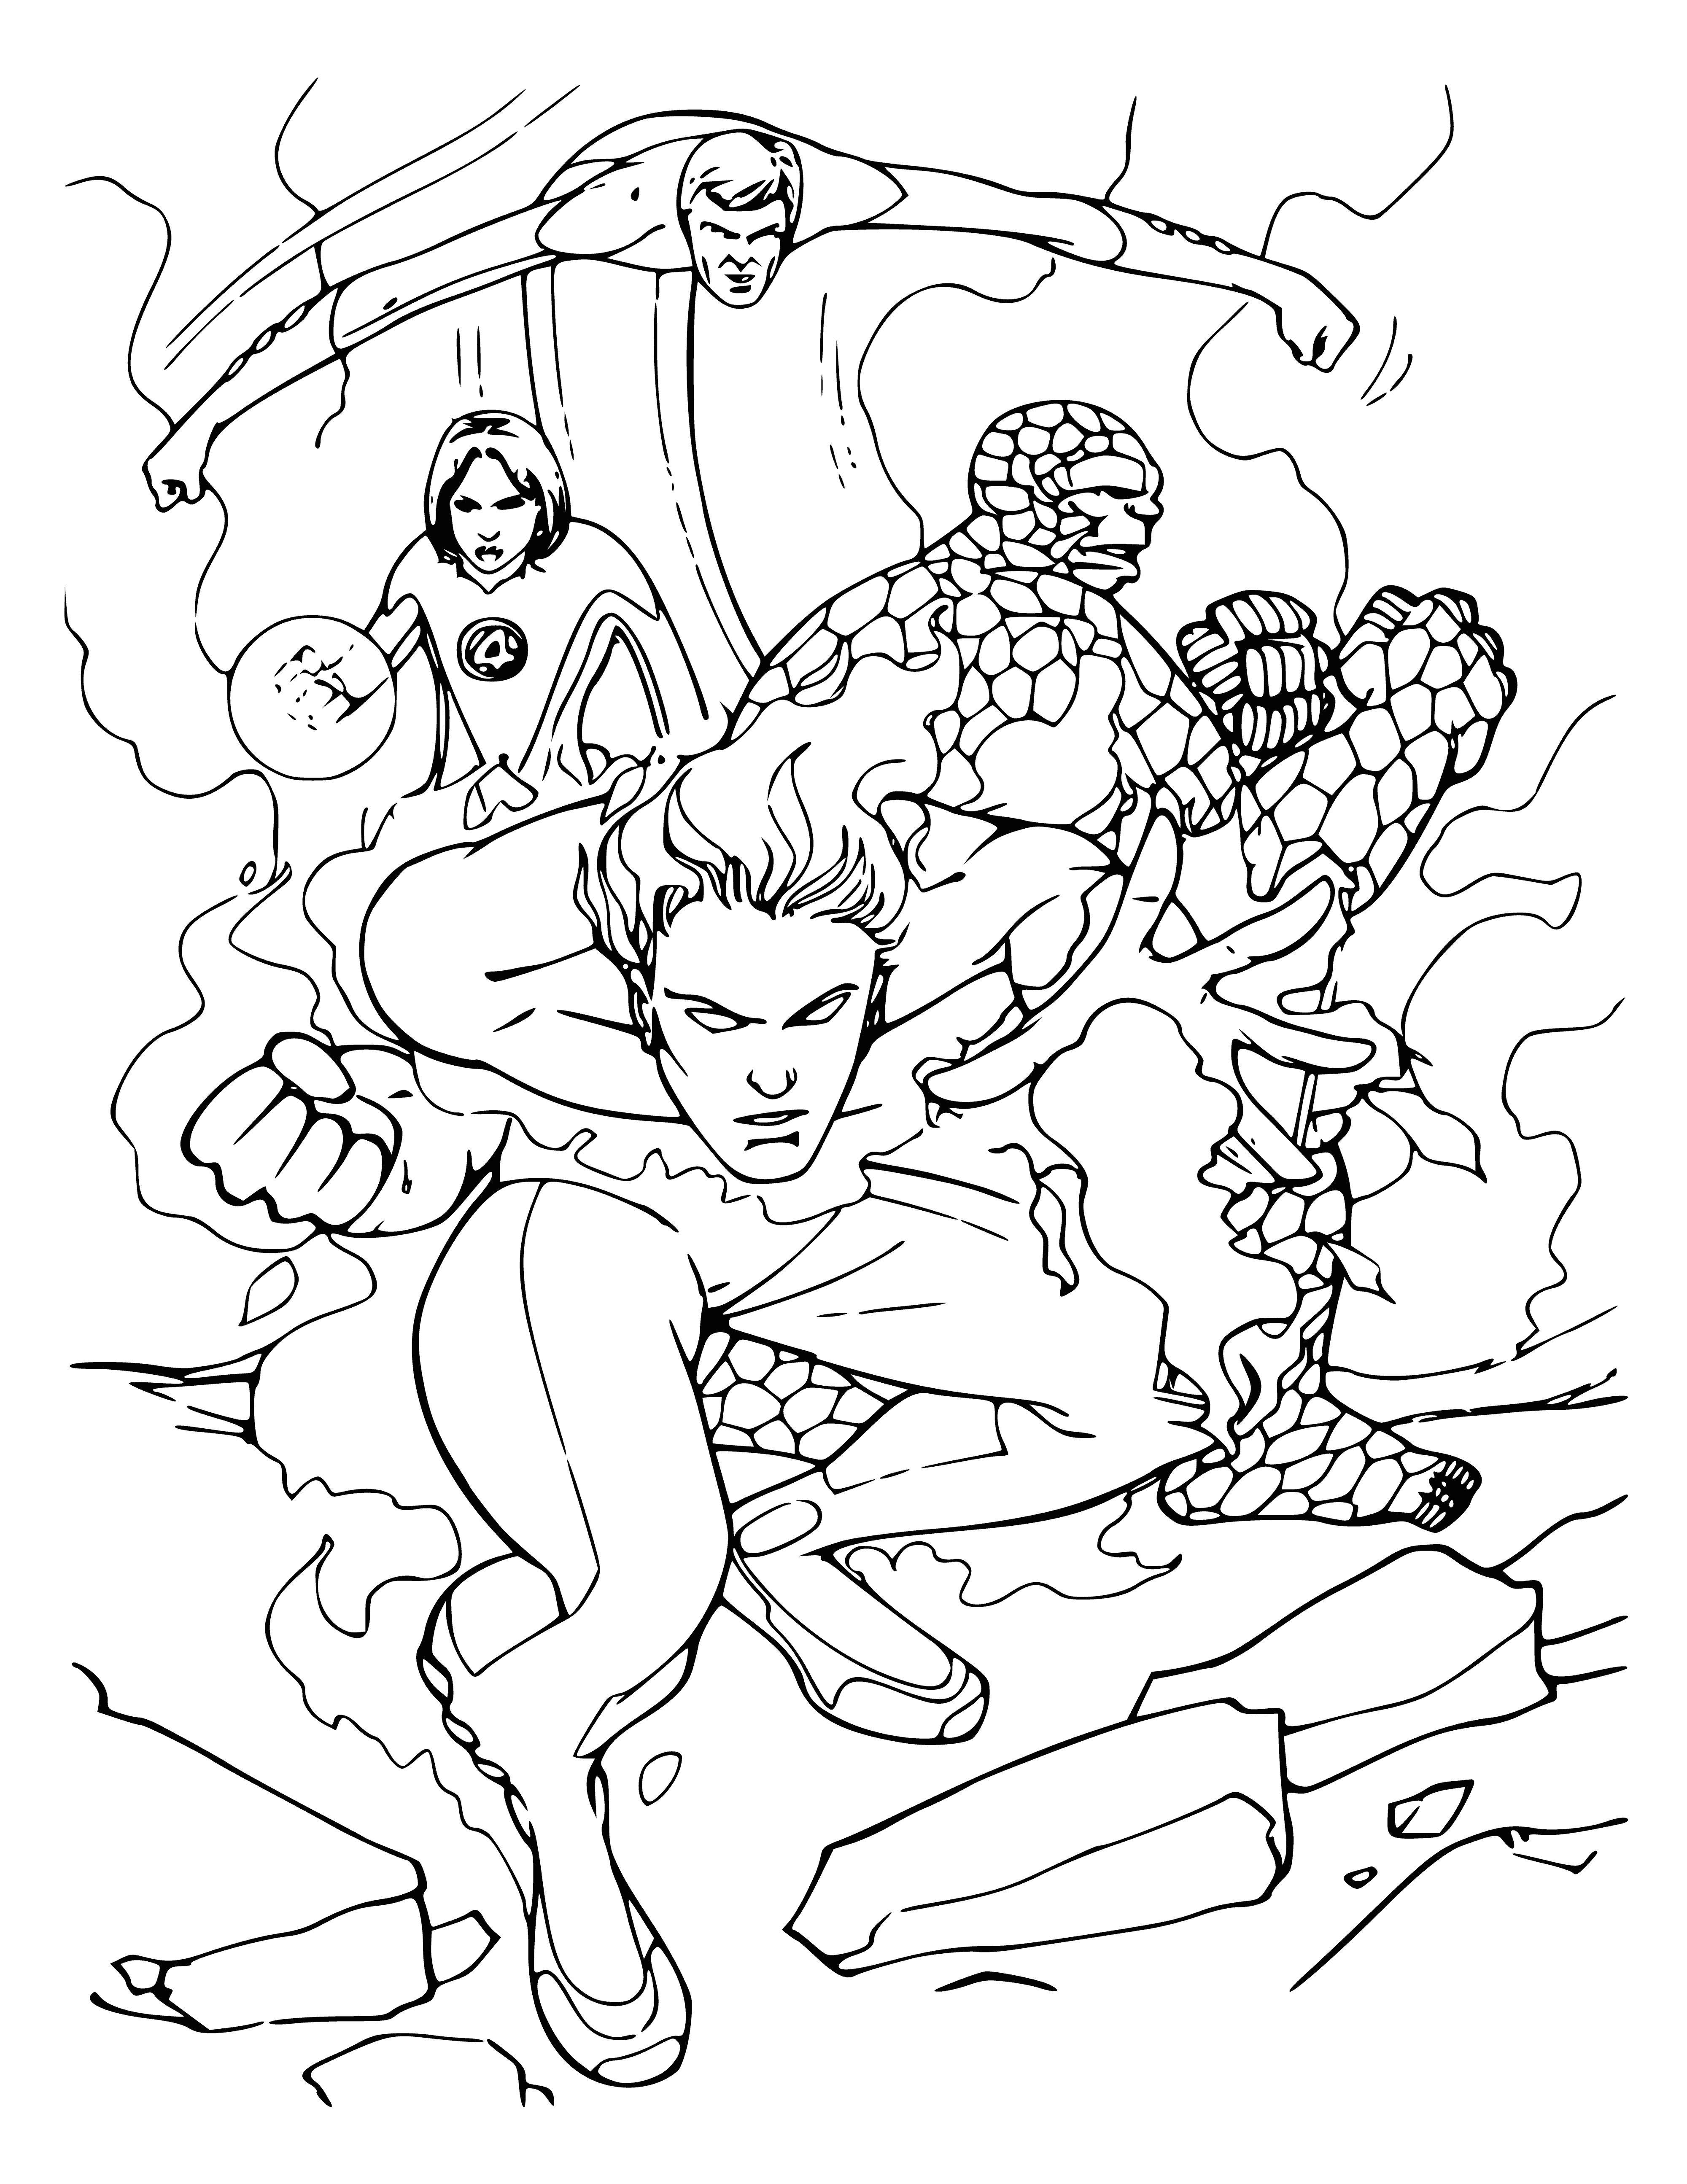 coloring page: The Fantastic Four have unique superpowers that they use as a team to protect the earth from evil. #FantasticFour #Superheroes